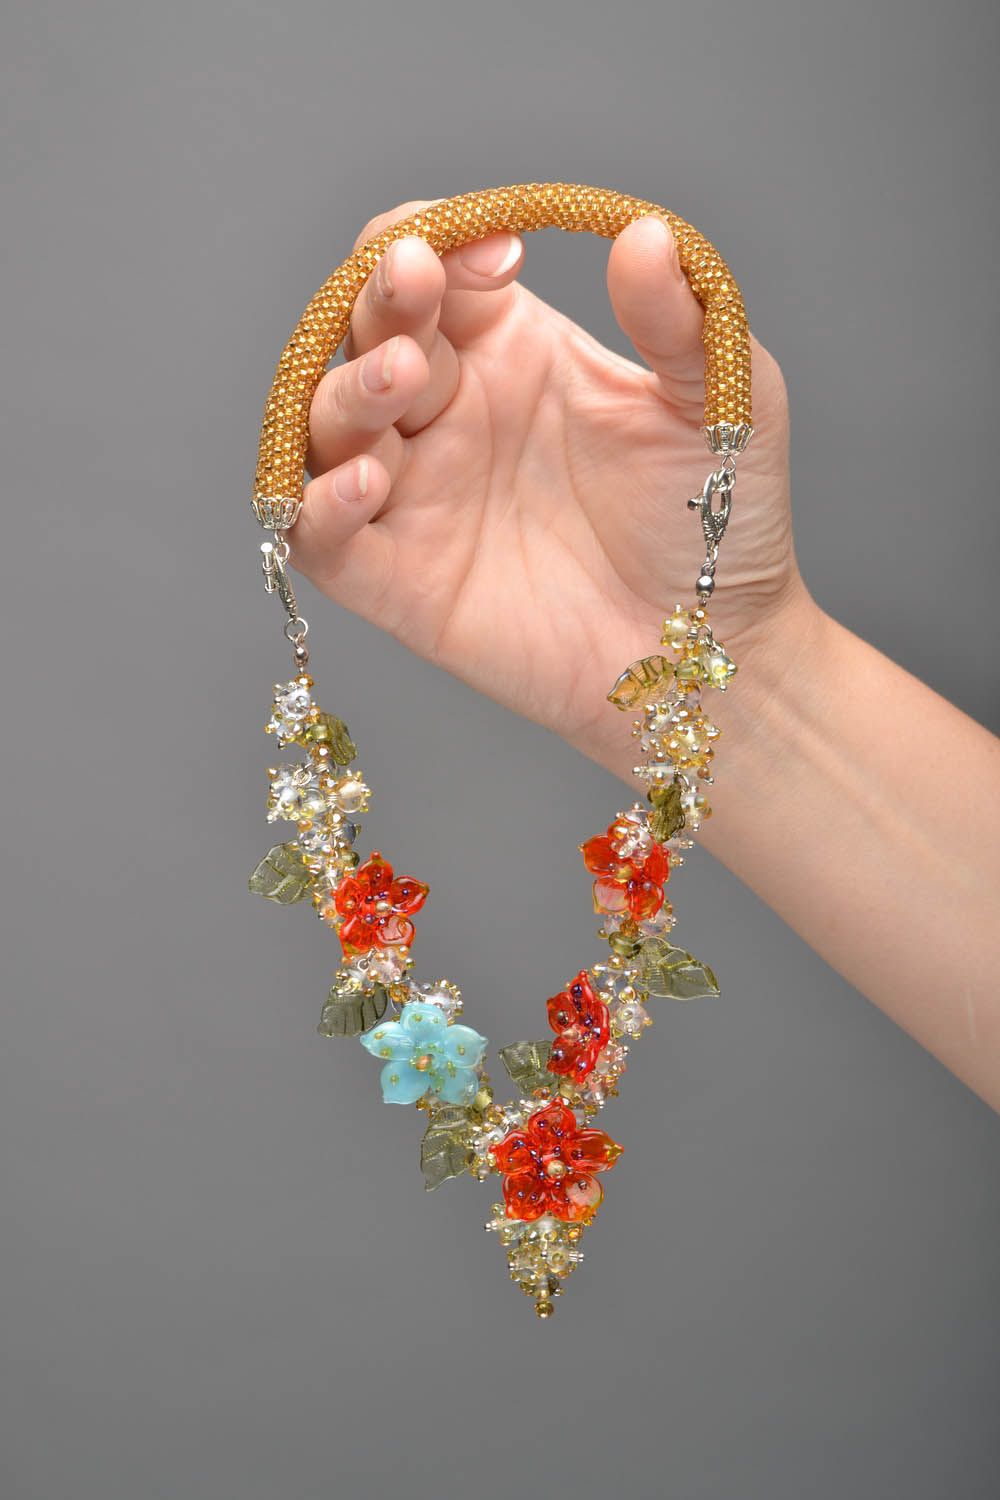 Necklet made of glass and beads Floret photo 2